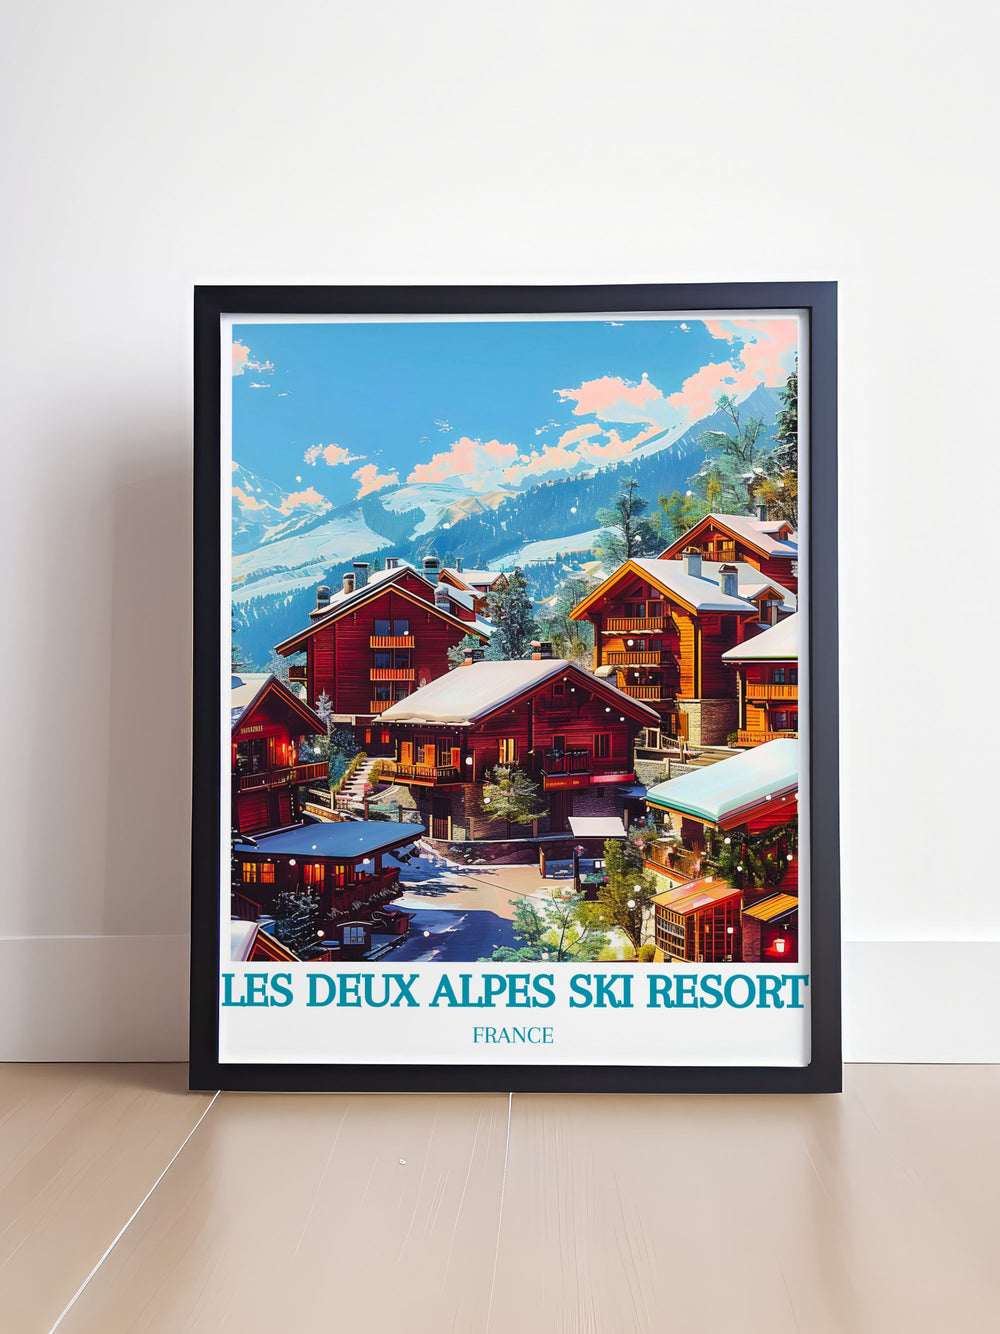 This travel poster beautifully depicts the winter allure of Les Deux Alpes and the charming presence of Venosc Village, ideal for adding a touch of the French Alps to any room.